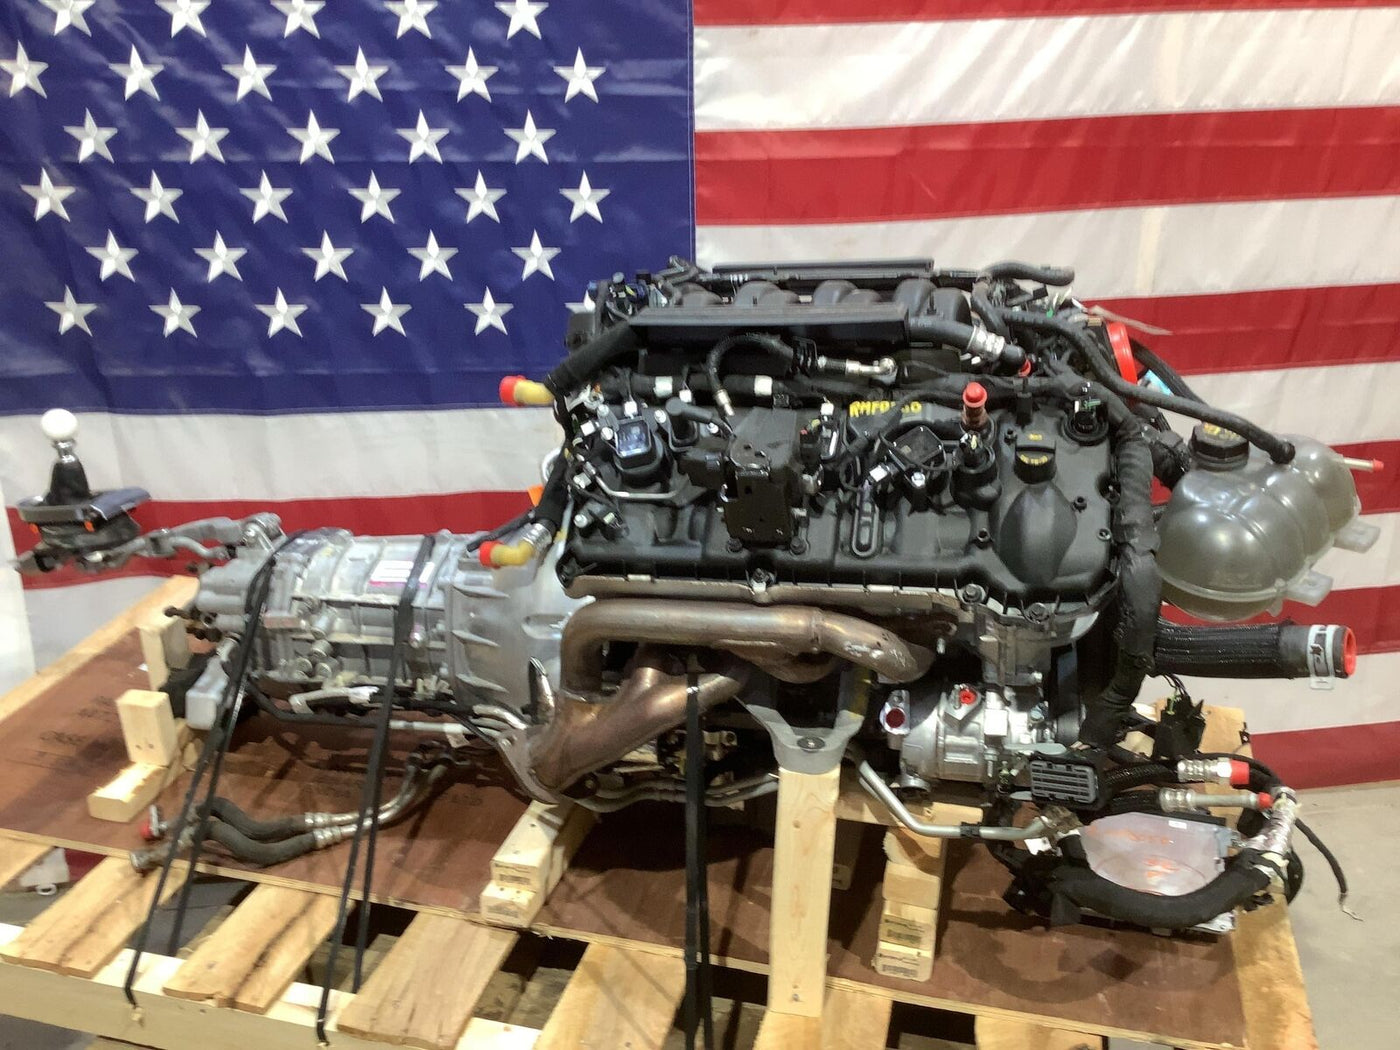 19-22 Mustang MACH 1 5.0L Coyote Engine W/ TR-3160 Trans Dropout Hot Rod Swap 4K